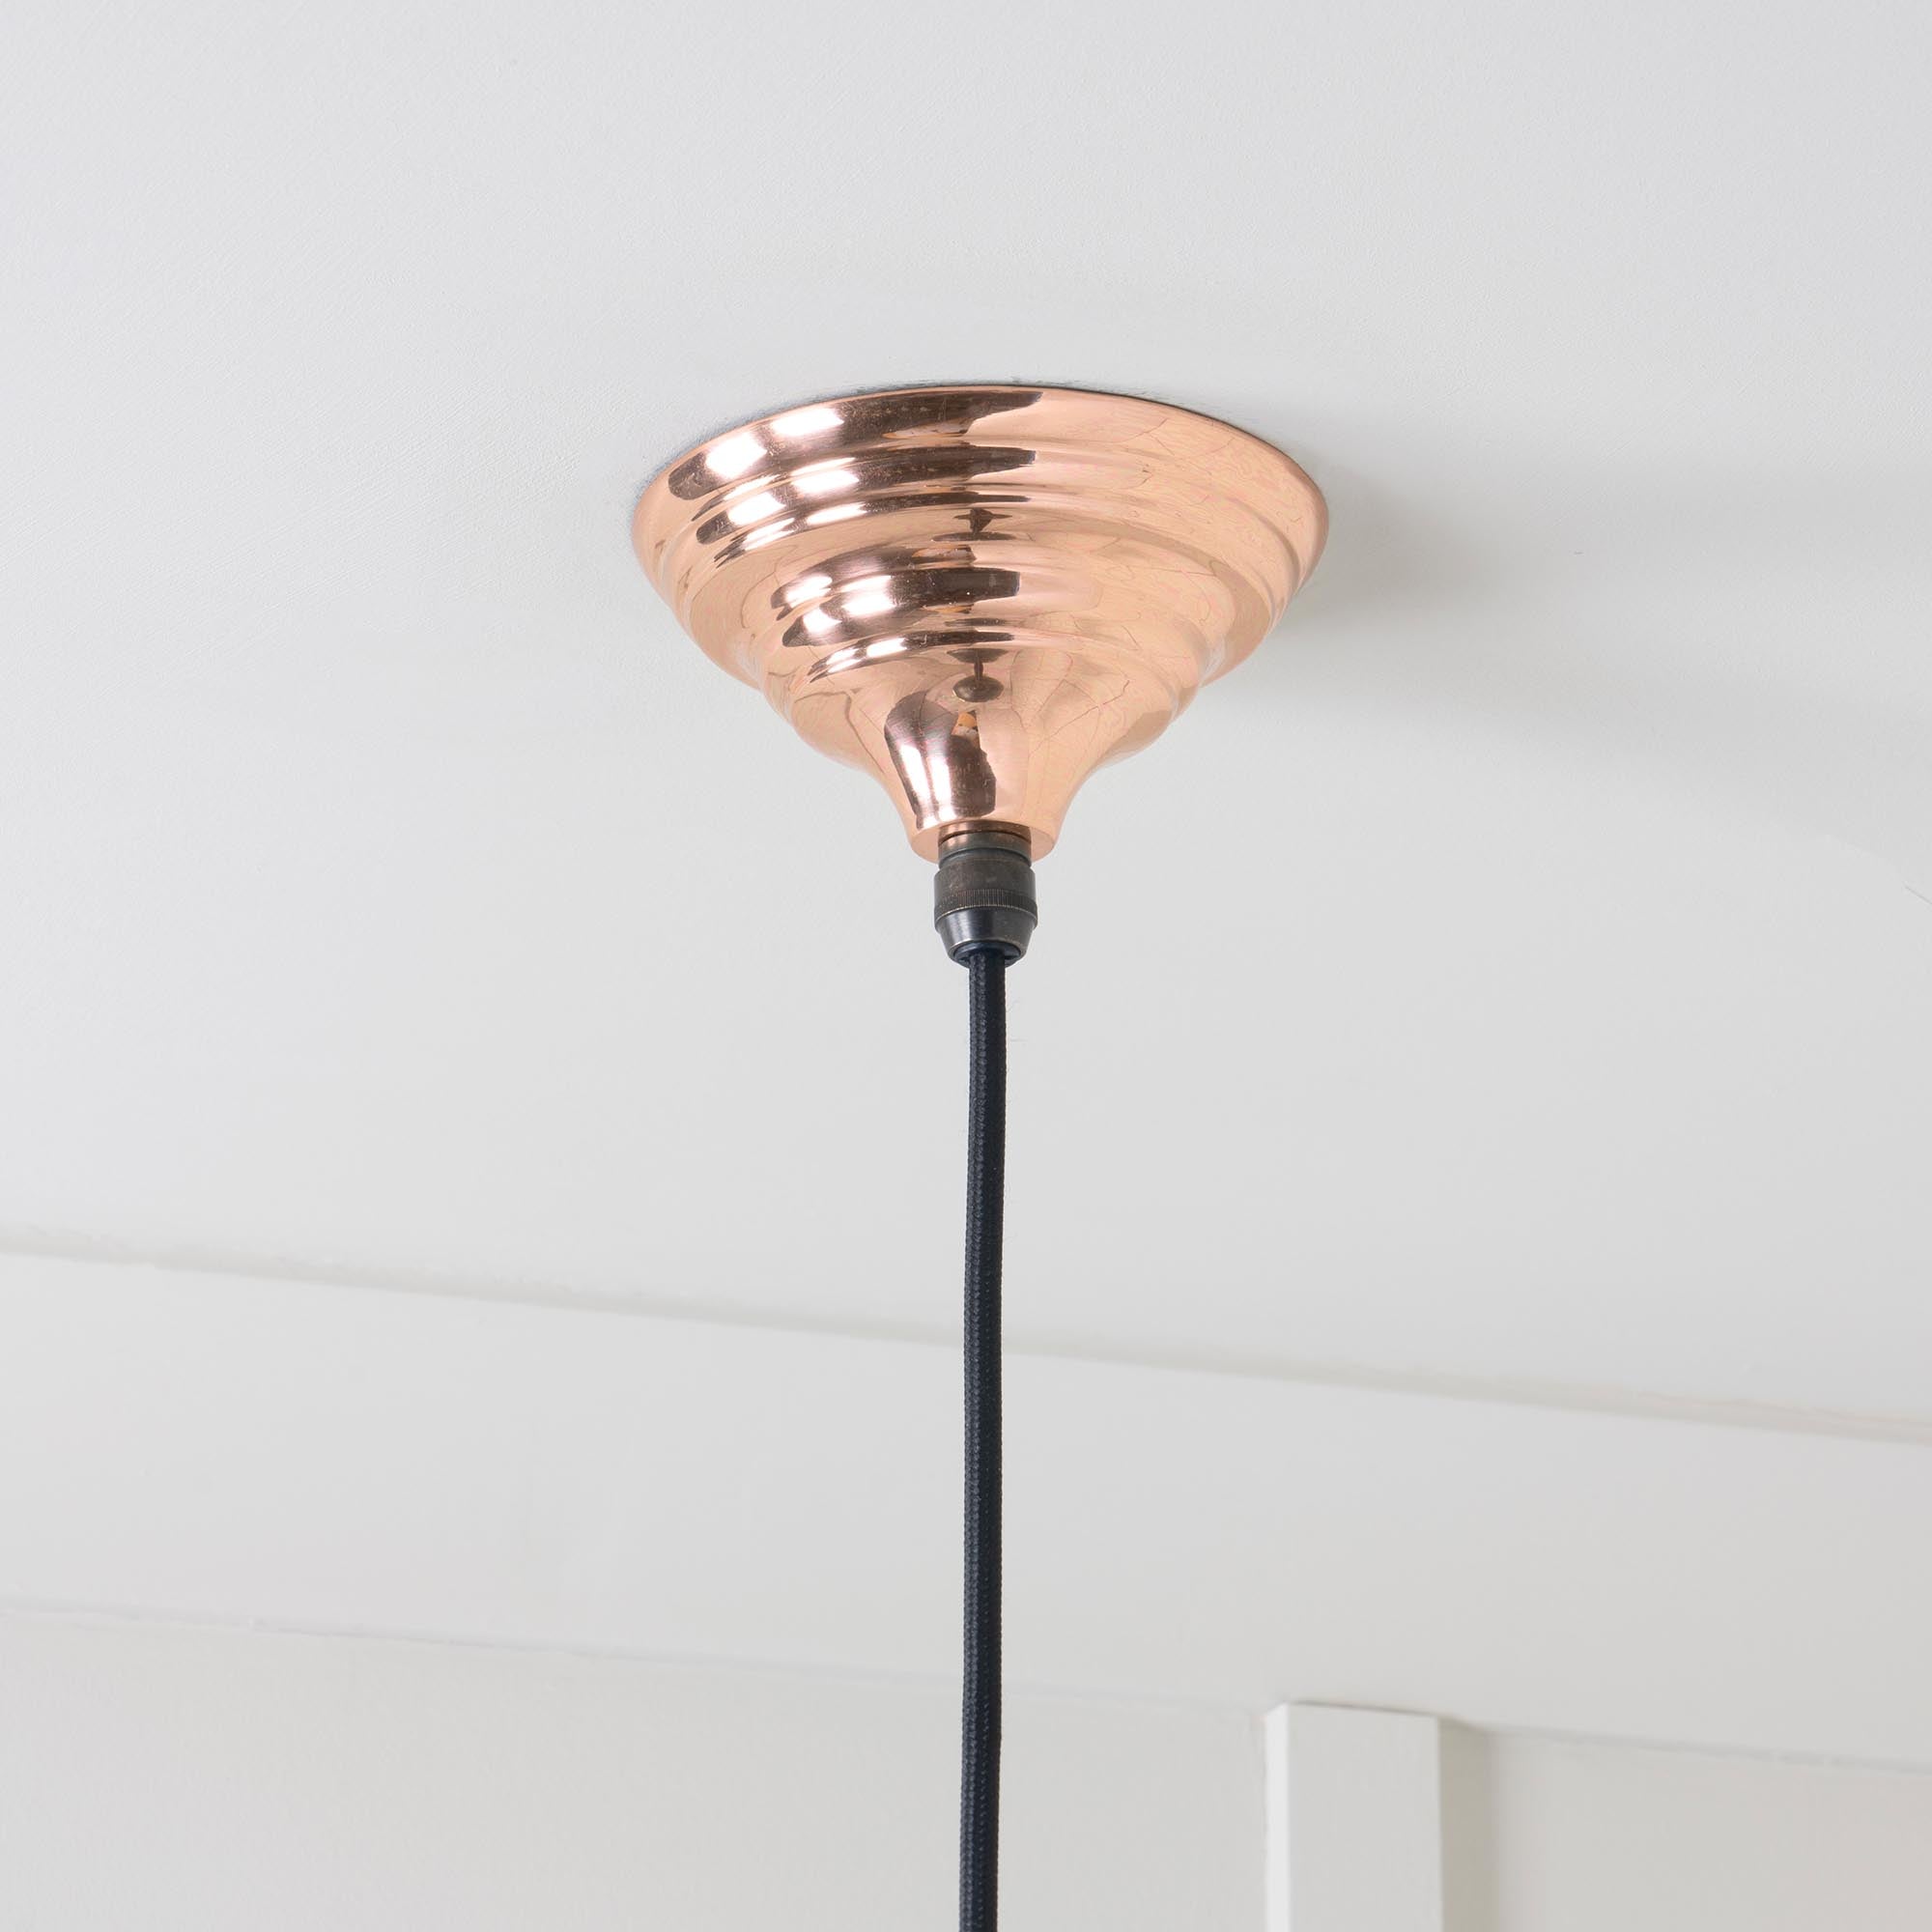 SHOW Close Up Image Harborne Ceiling Light in Burnished Brass In Smooth Copper